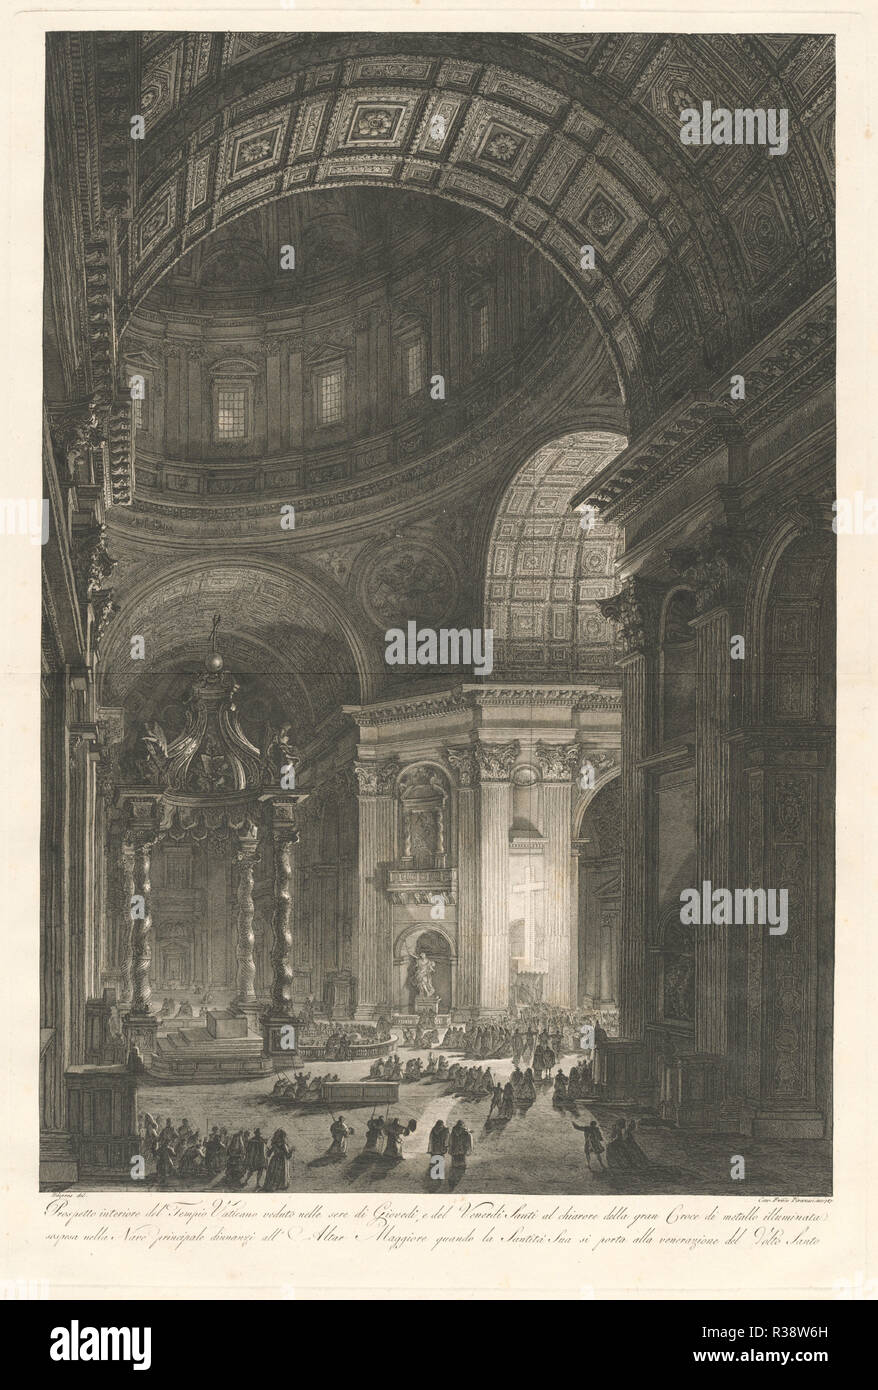 Interior of St. Peter?s, with the Illumination of the Cross of St. Peter. Dated: 1750-1778. Dimensions: plate: 76.52 × 51.12 cm (30 1/8 × 20 1/8 in.)  sheet: 89.22 × 63.5 cm (35 1/8 × 25 in.). Medium: etching on laid paper. Museum: National Gallery of Art, Washington DC. Author: Francesco Piranesi. Stock Photo